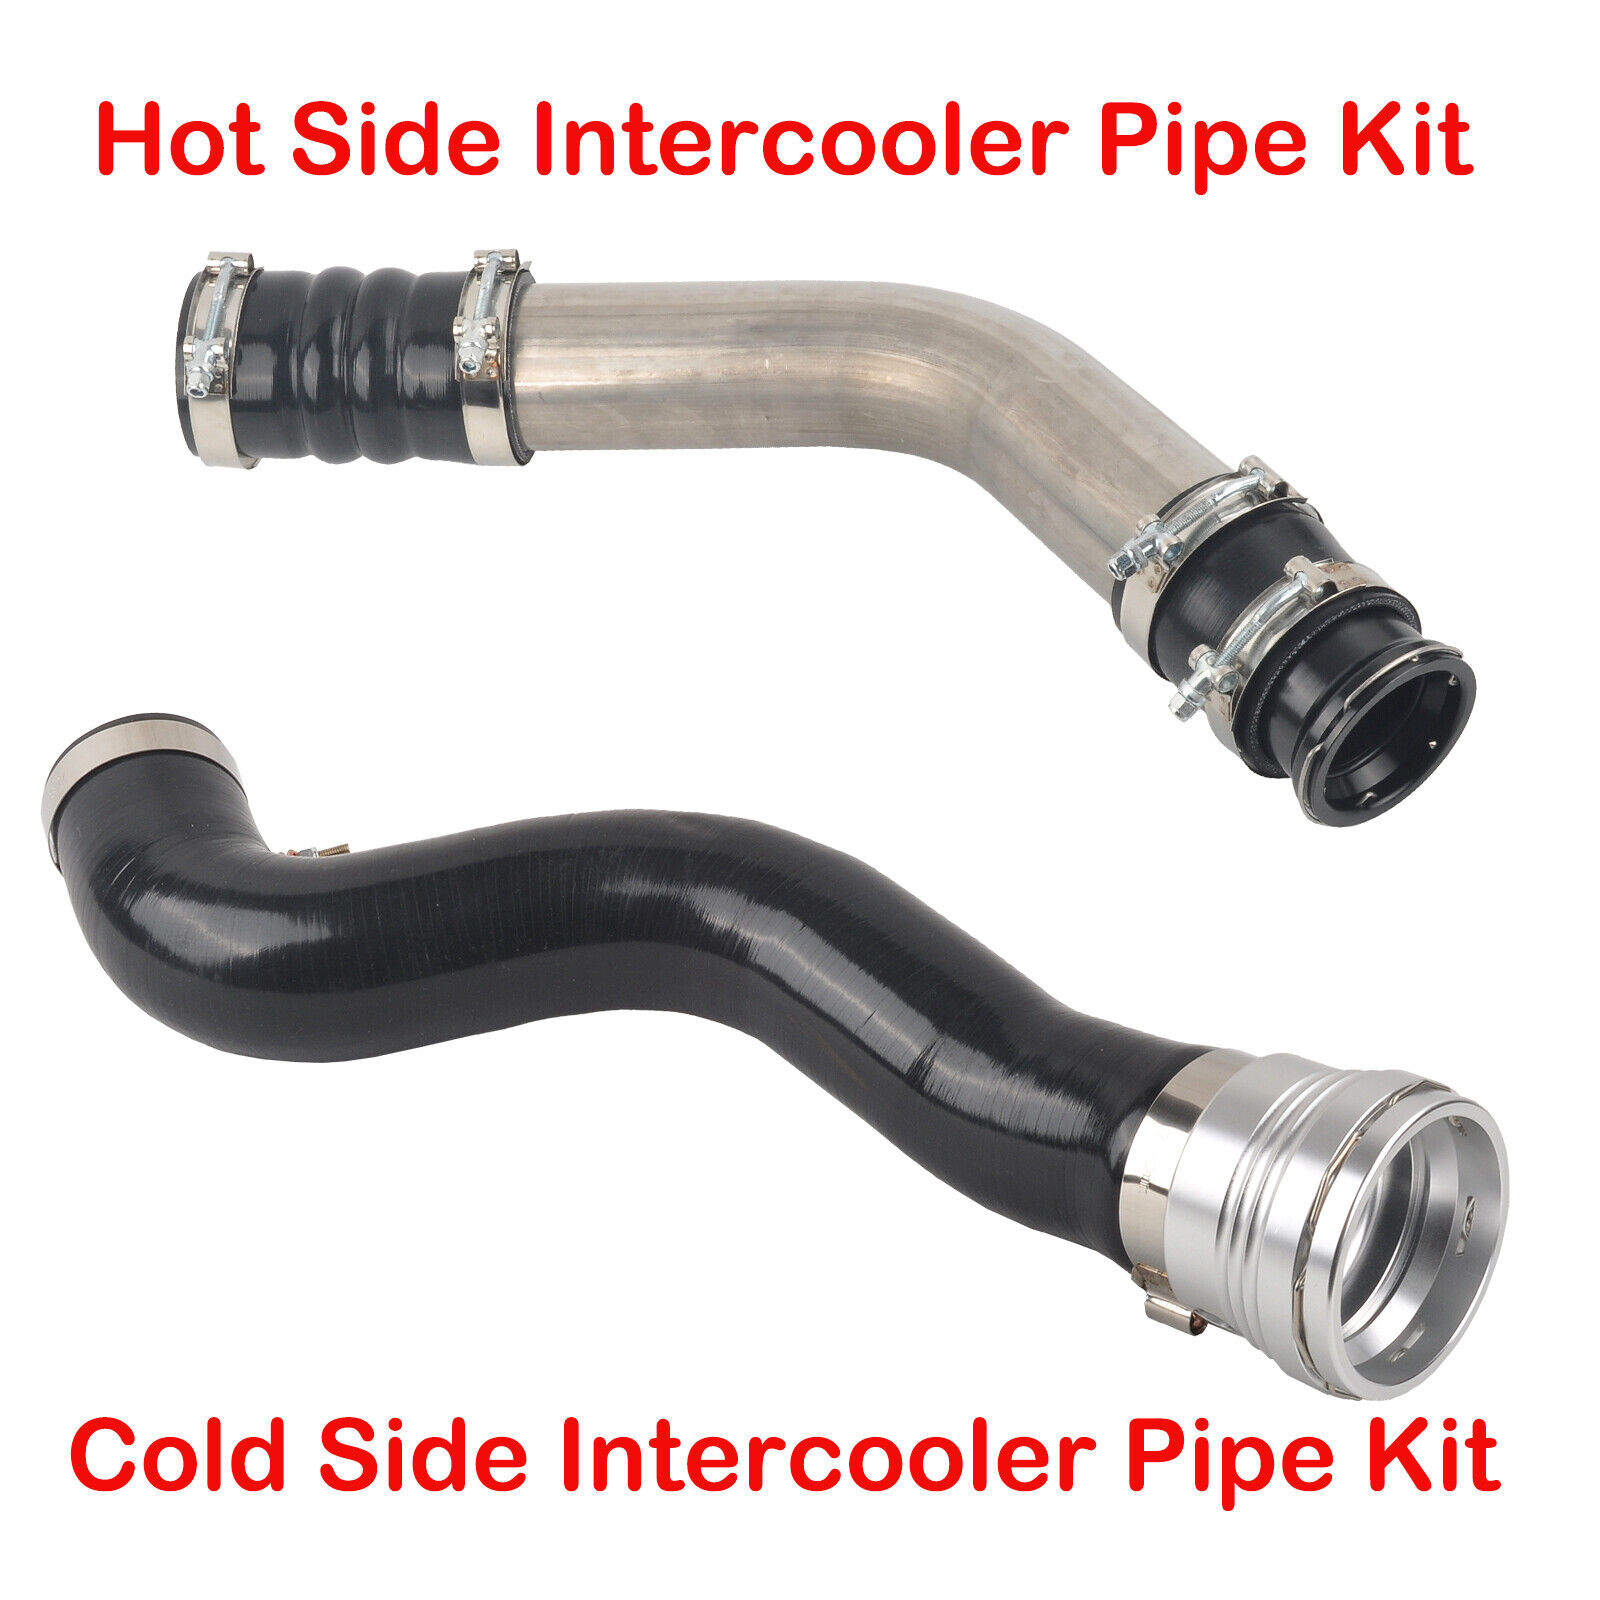 Cold & Hot Side Intercooler Pipe & Boot Kits for 2017-2021 Ford 6.7L Powerstoke